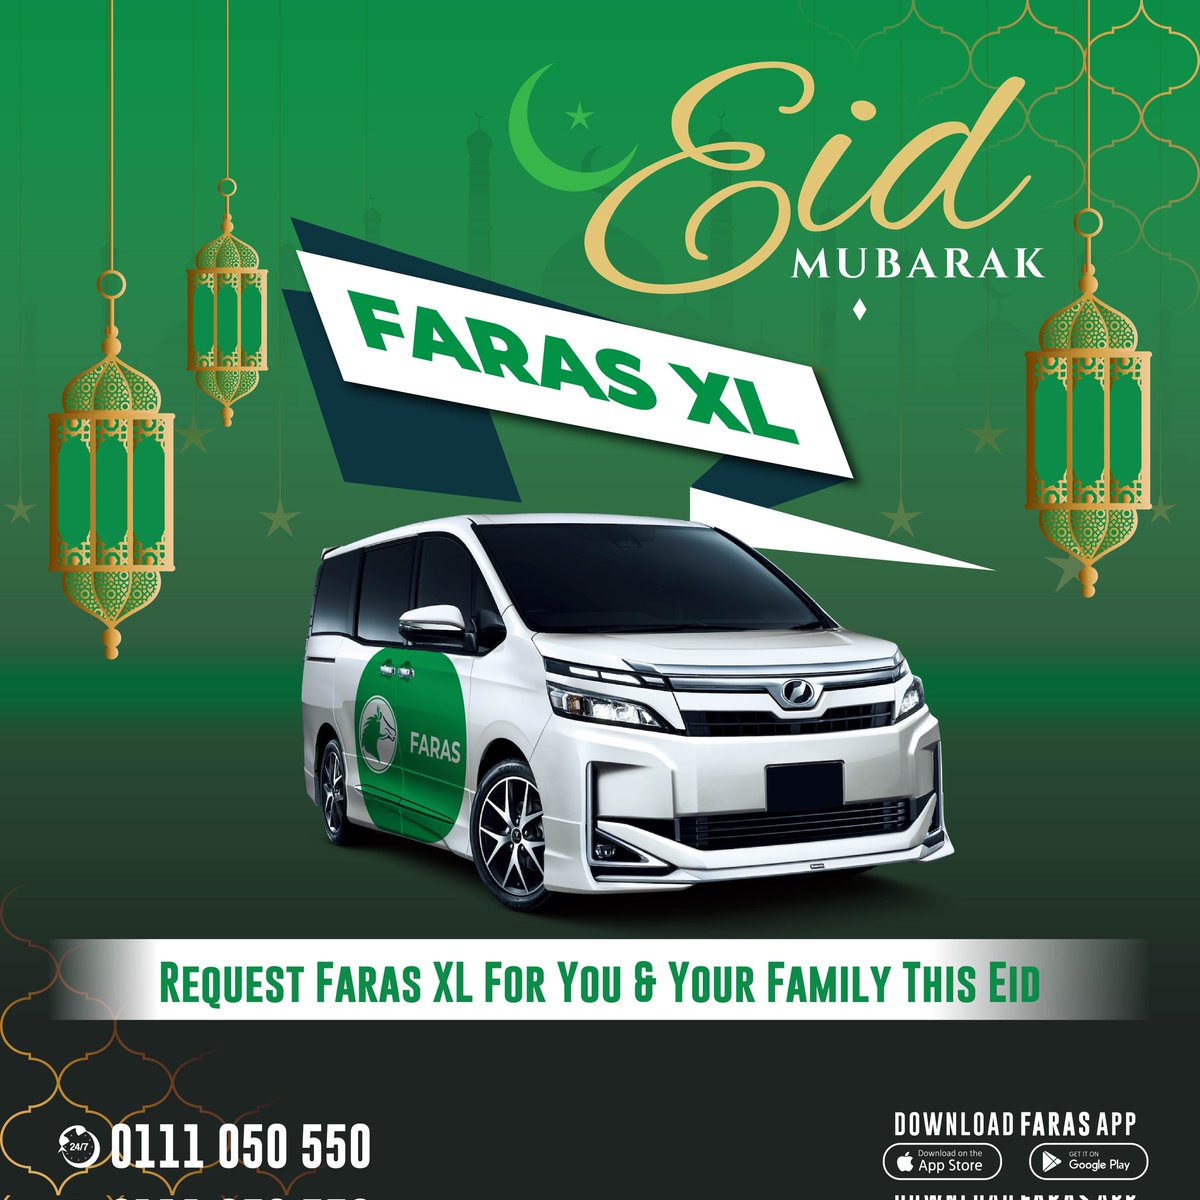 Make your EID celebration memorable by booking Faras XL, the perfect choice for traveling with your family during this Edul fitri. With its ample space, Faras XL can easily accommodate up to 7 people, providing a comfortable journey for all Download the Faras App now…